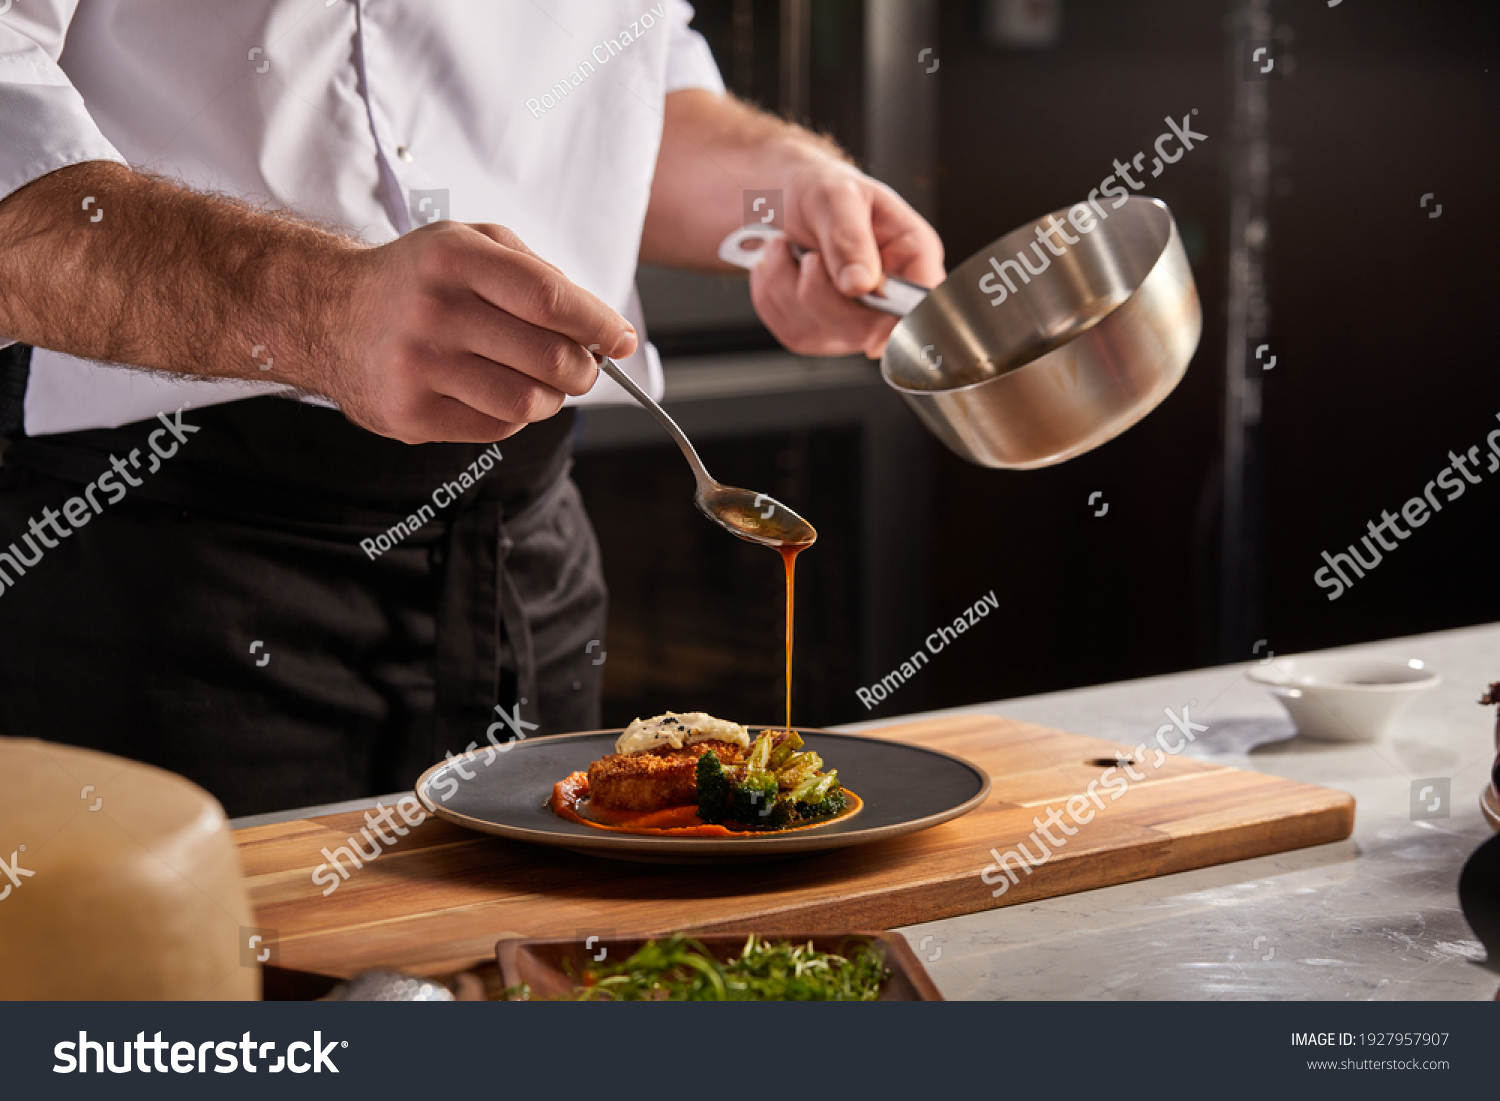 Cook in apron adding some sauce to dish. Cropped chef preparing food, meal, in kitchen, chef cooking, Chef decorating dish, closeup #1927957907